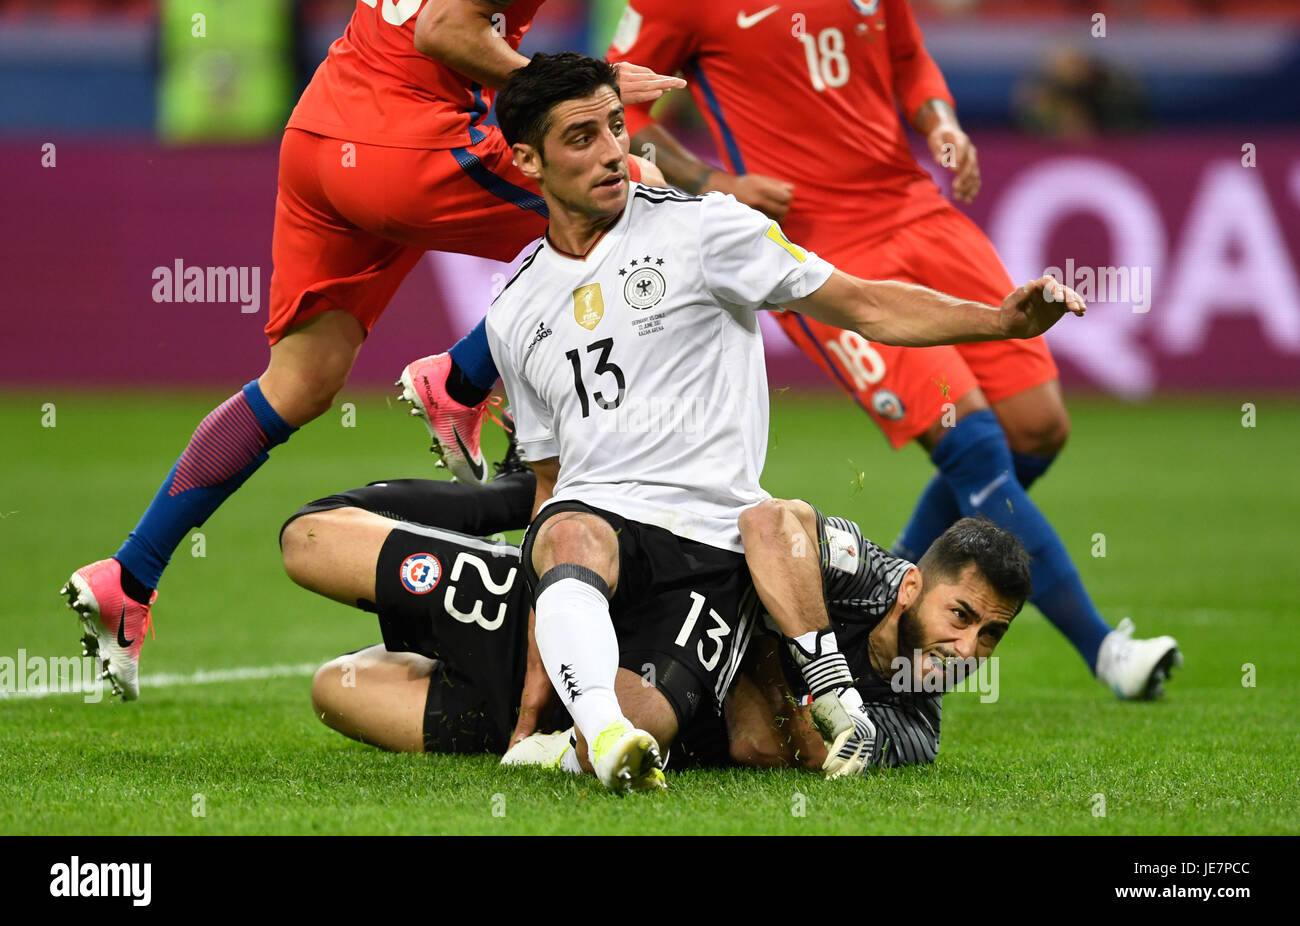 Kazan, Russia. 22nd June, 2017. Germany's Lars Stindl (C) defeats Chilean goalkeeper Johnny Herrera for the equalizer during the Group B preliminary stage soccer match between Chile and Germany at the Confederations Cup in Kazan, Russia, 22 June 2017. Photo: Marius Becker/dpa/Alamy Live News Stock Photo